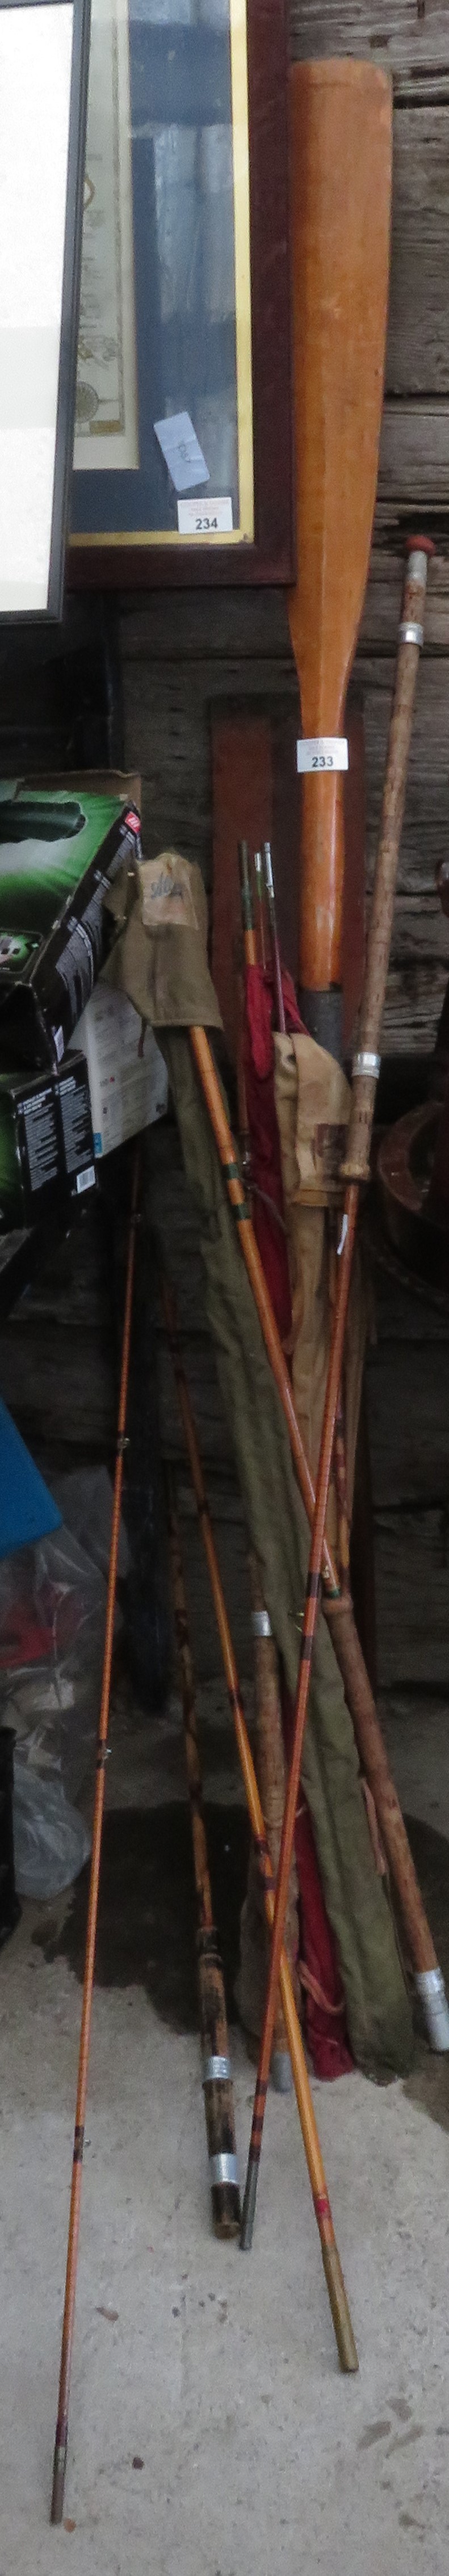 QUANTITY OF VINTAGE FISHING EQUIPMENT & WOODEN OARS